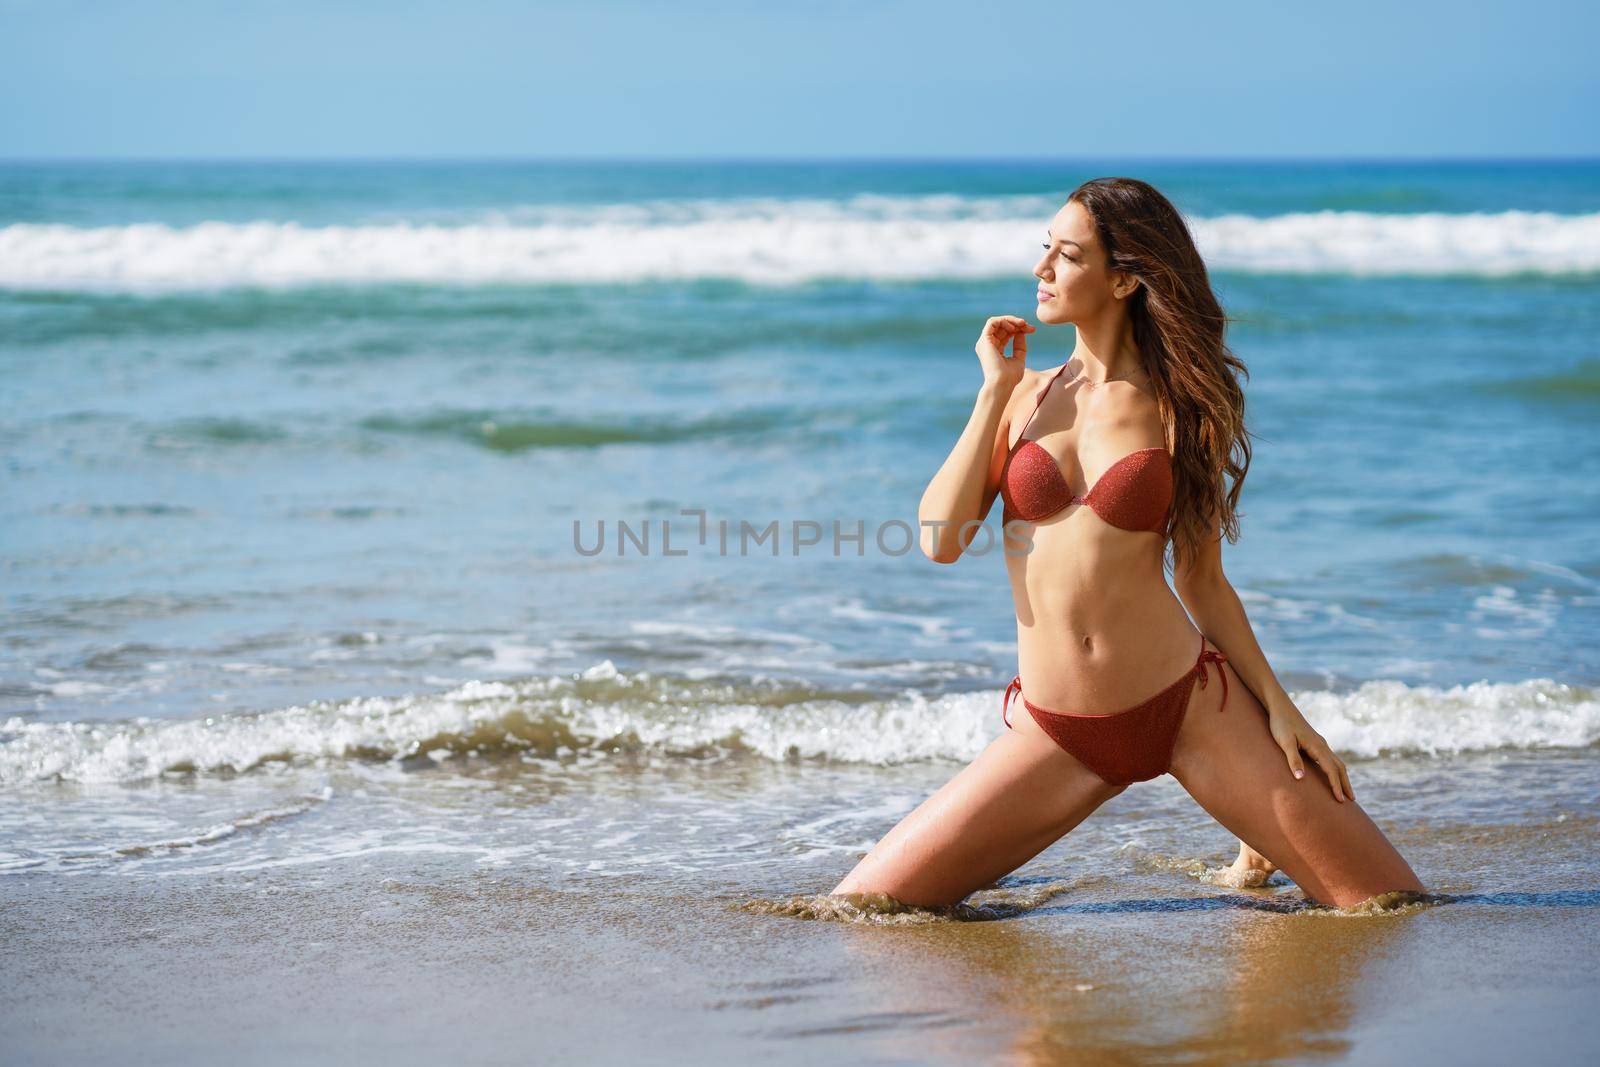 Young woman with beautiful body on her knees on the sand of the beach